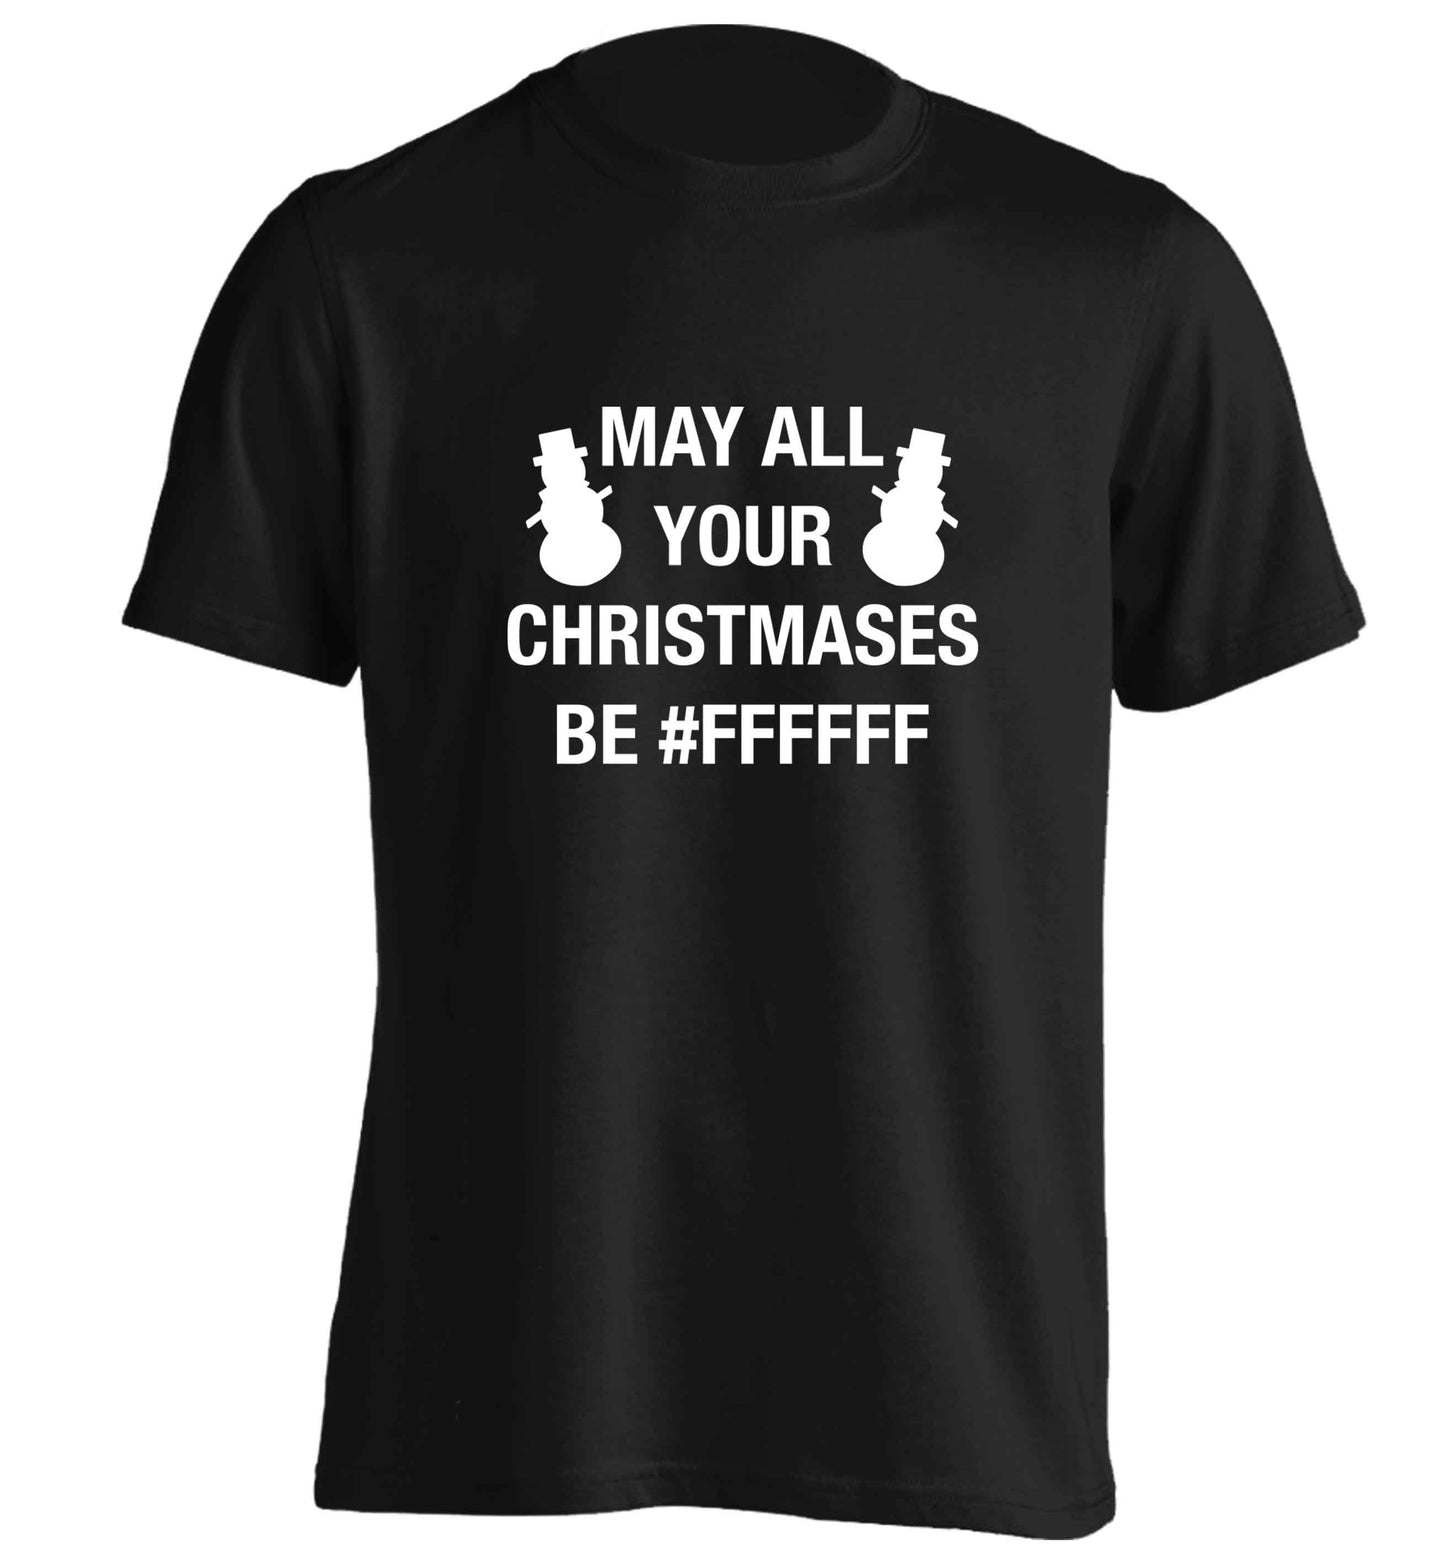 May all your Christmases be #FFFFFF adults unisex black Tshirt 2XL